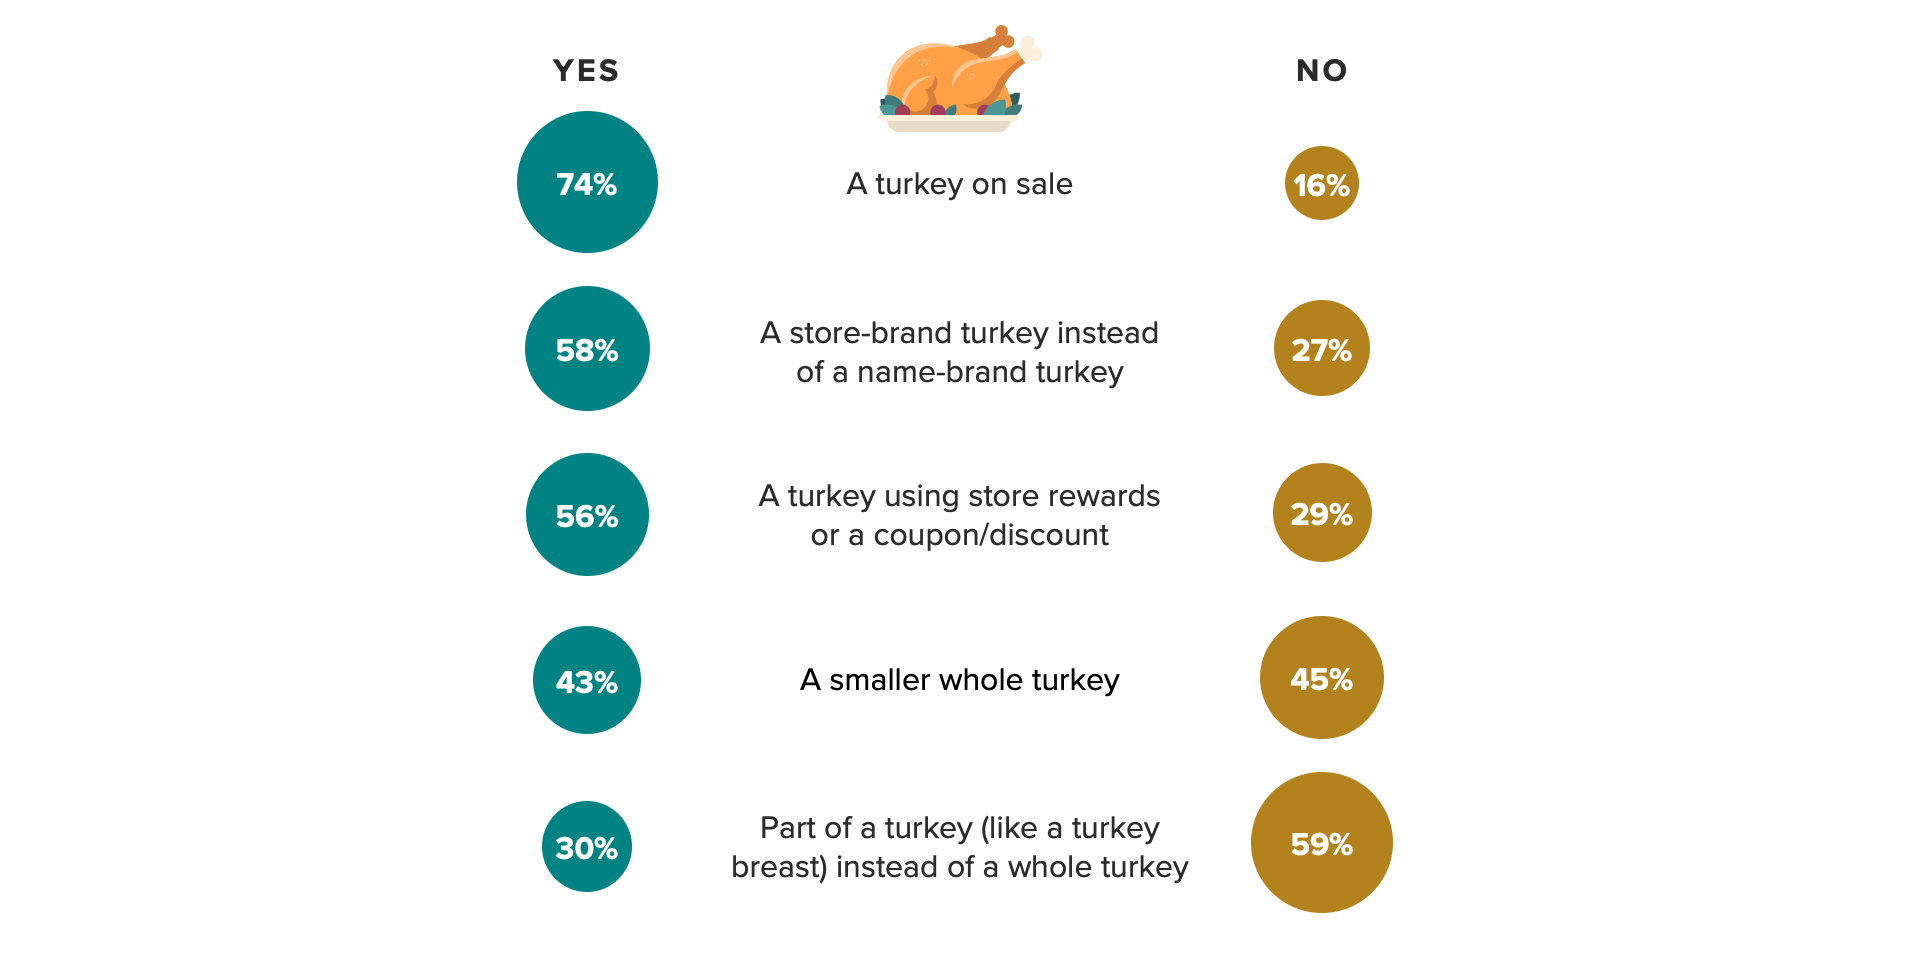 Chart of how respondents purchasing a turkey who said they anticipate buying any of the following less expensive turkey options, showing that three-quarters are looking for a turkey on sale.